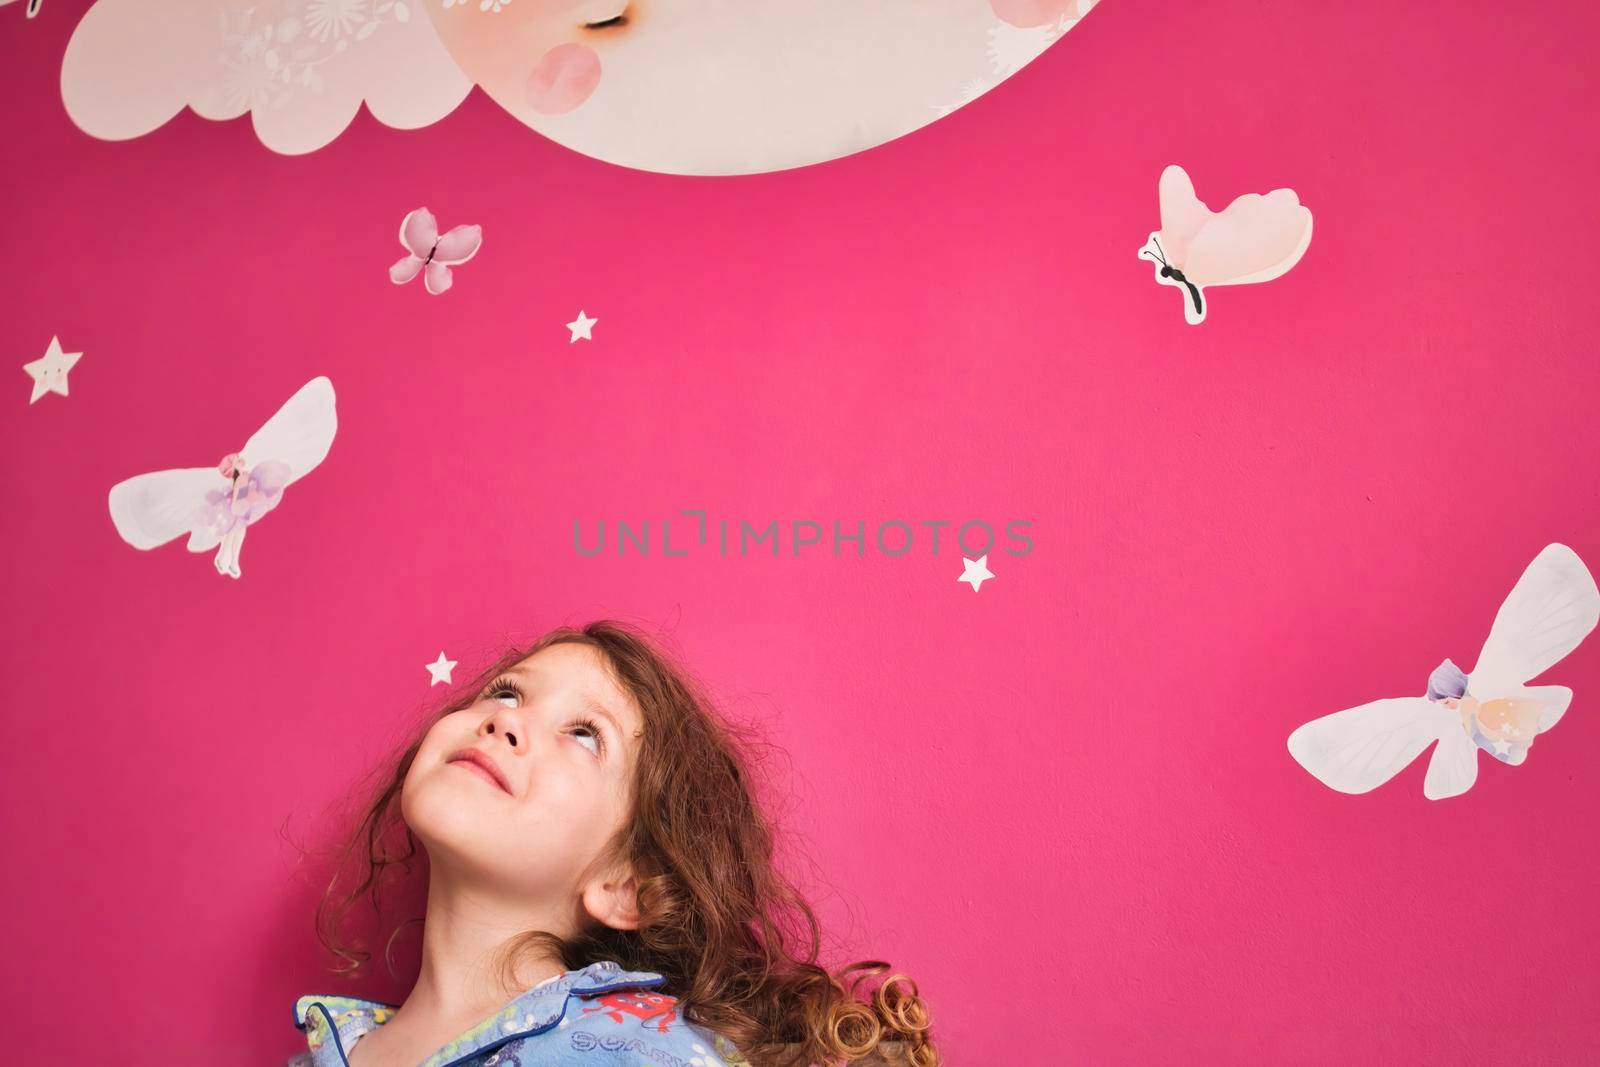 Young cute girl wearing pajamas looking up at a pink wall with decal stars, moon and fairies by tennesseewitney